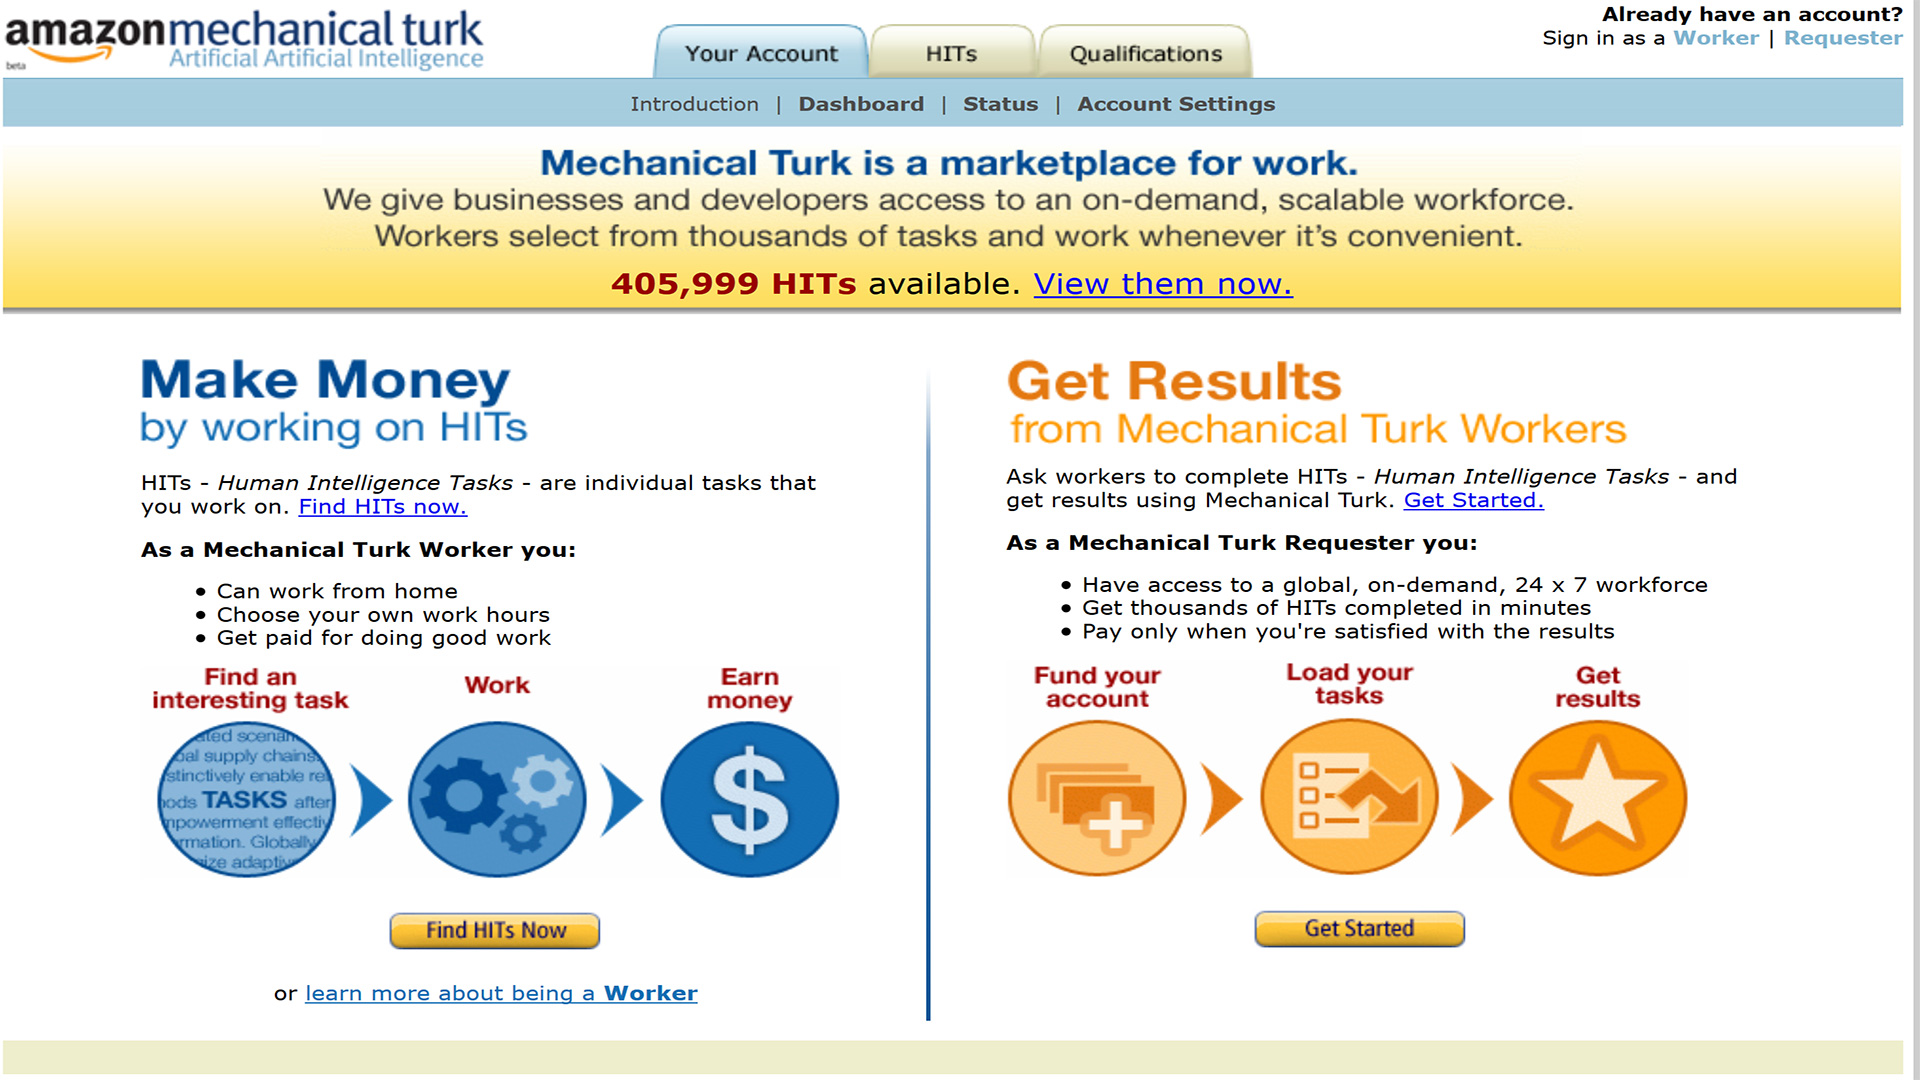 9 Ways to Increase Your mTurk Earnings